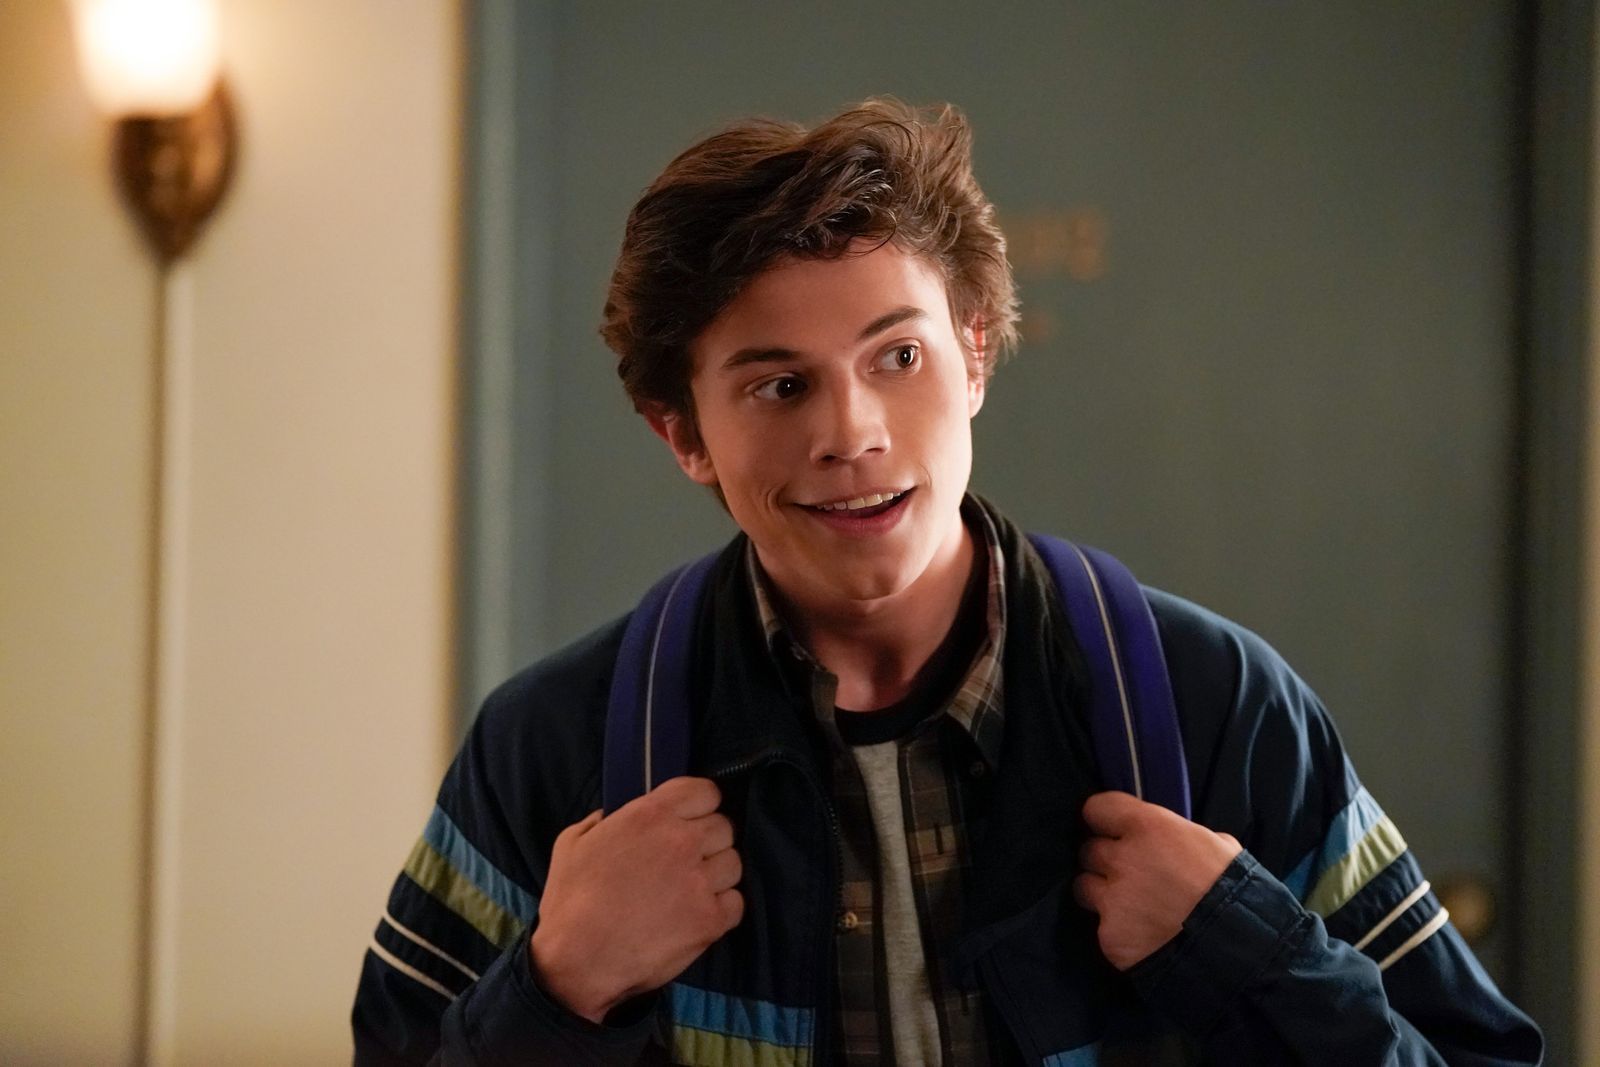 Felix Weston smiling as he waits for Victor in front of his apartment door in Love, Victor (2020-Present).